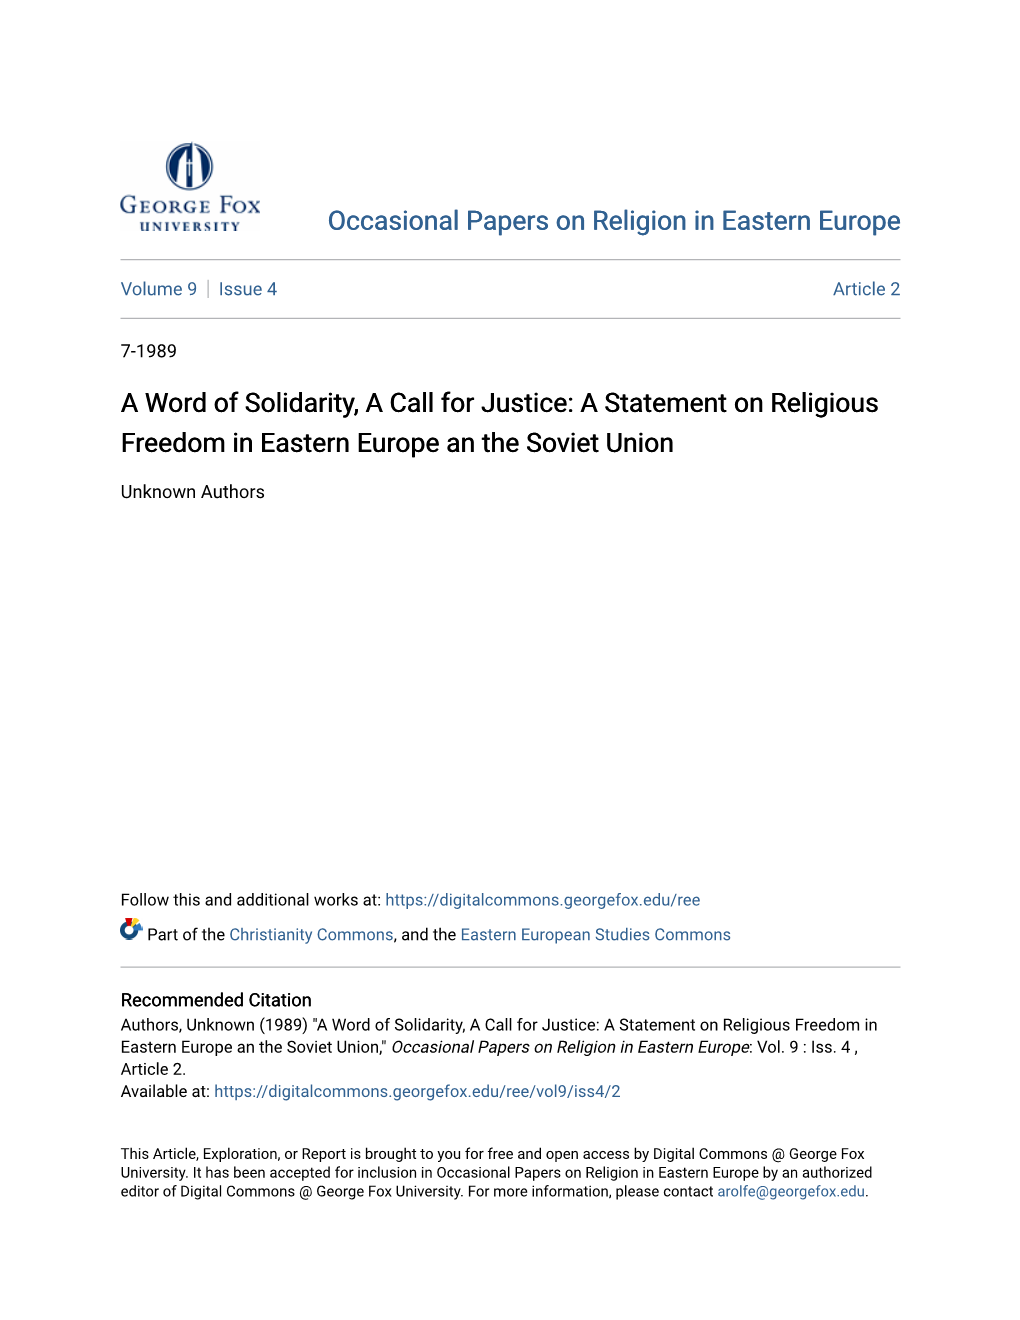 A Statement on Religious Freedom in Eastern Europe an the Soviet Union